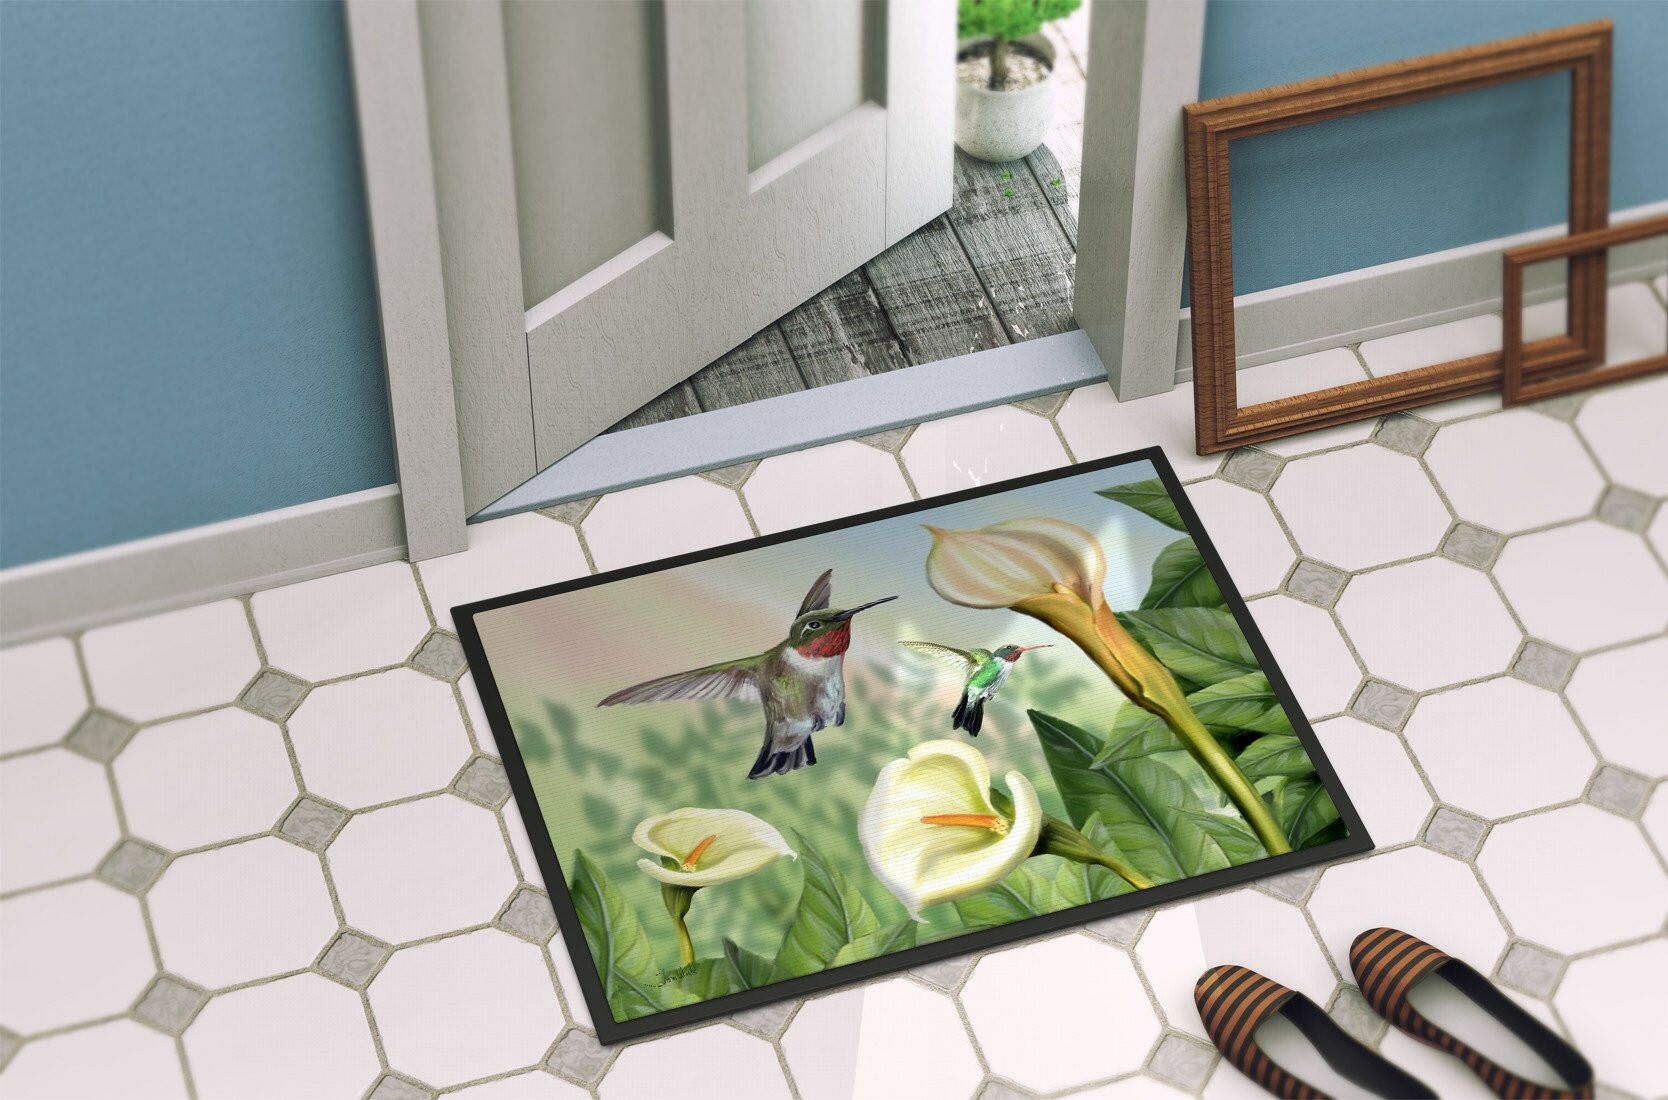 Lily and the Hummingbirds Indoor or Outdoor Mat 24x36 PTW2058JMAT - the-store.com